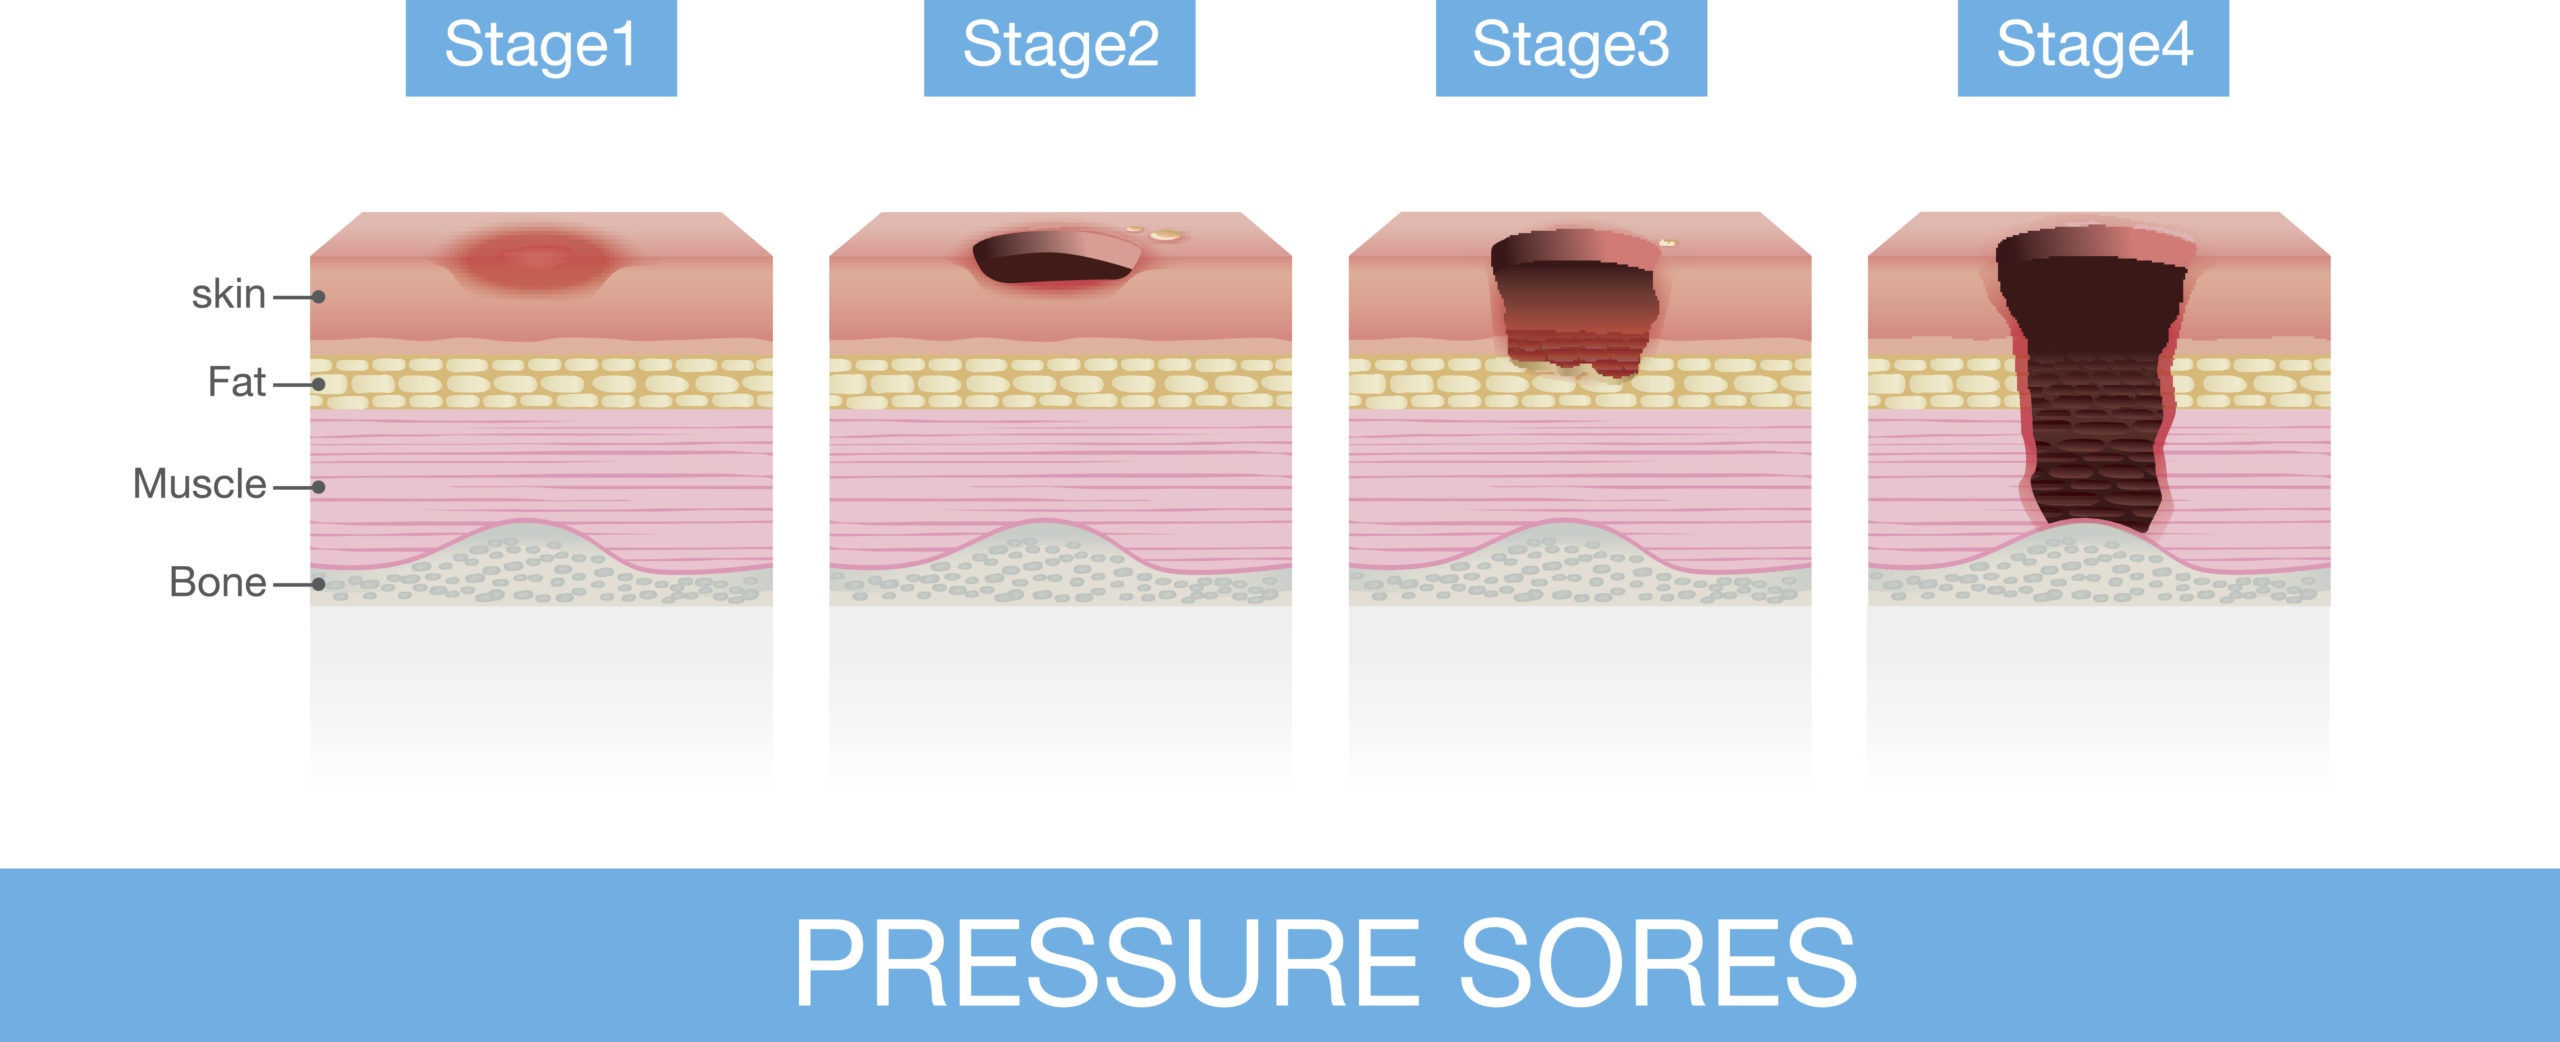 the different stages of bed sores